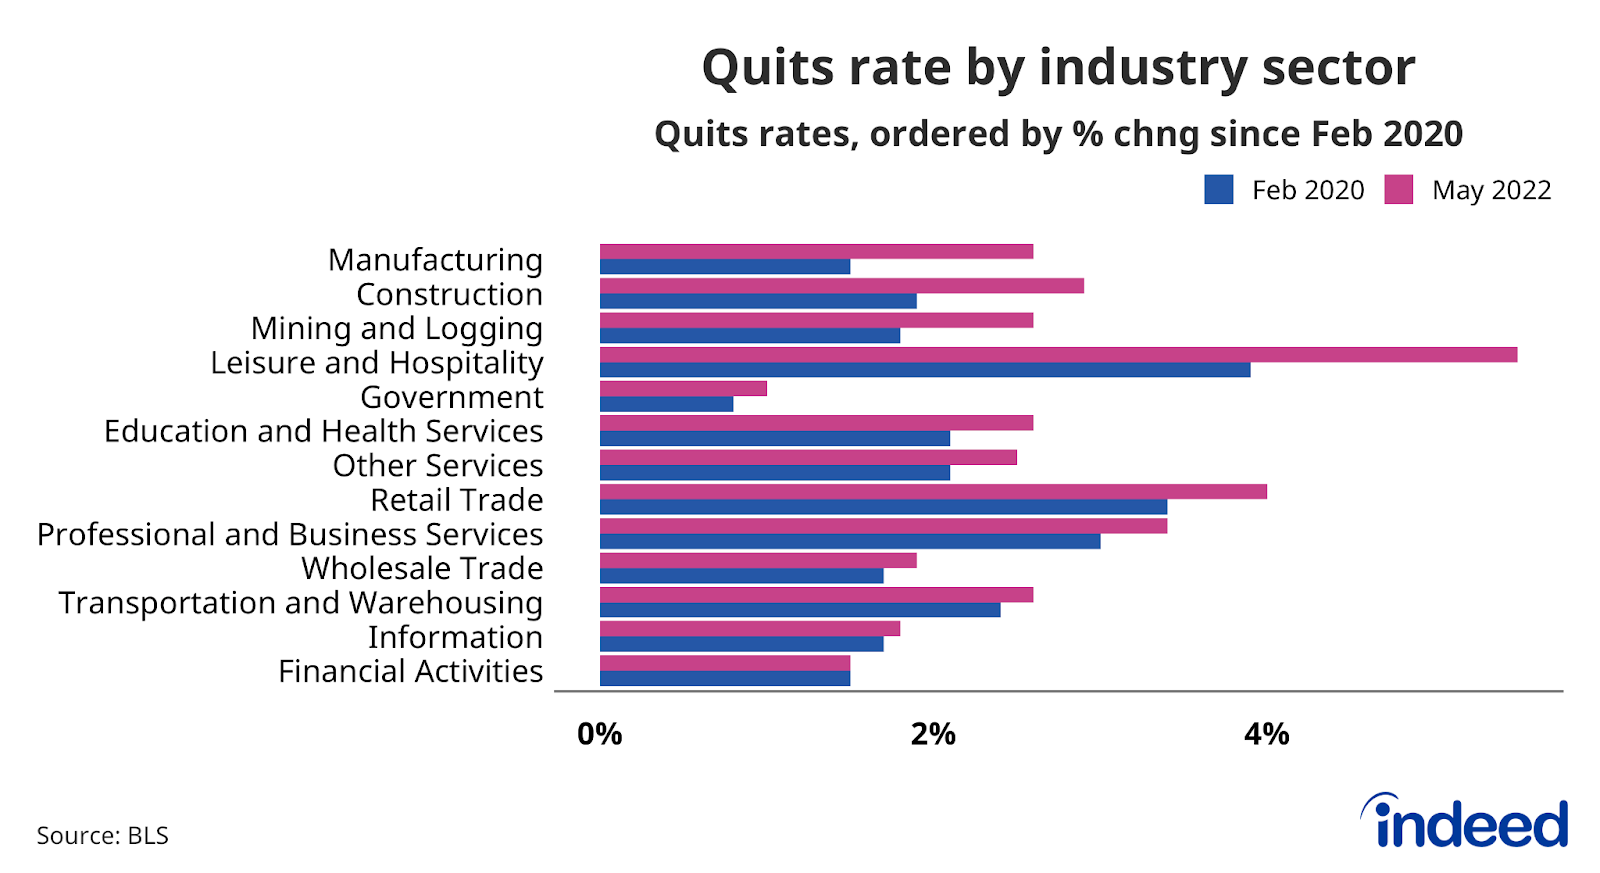 Bar graph titled “Quits rate by industry sector” with a horizontal axis ranging from 0% to 5% and a vertical axis that lists major industry sectors. 